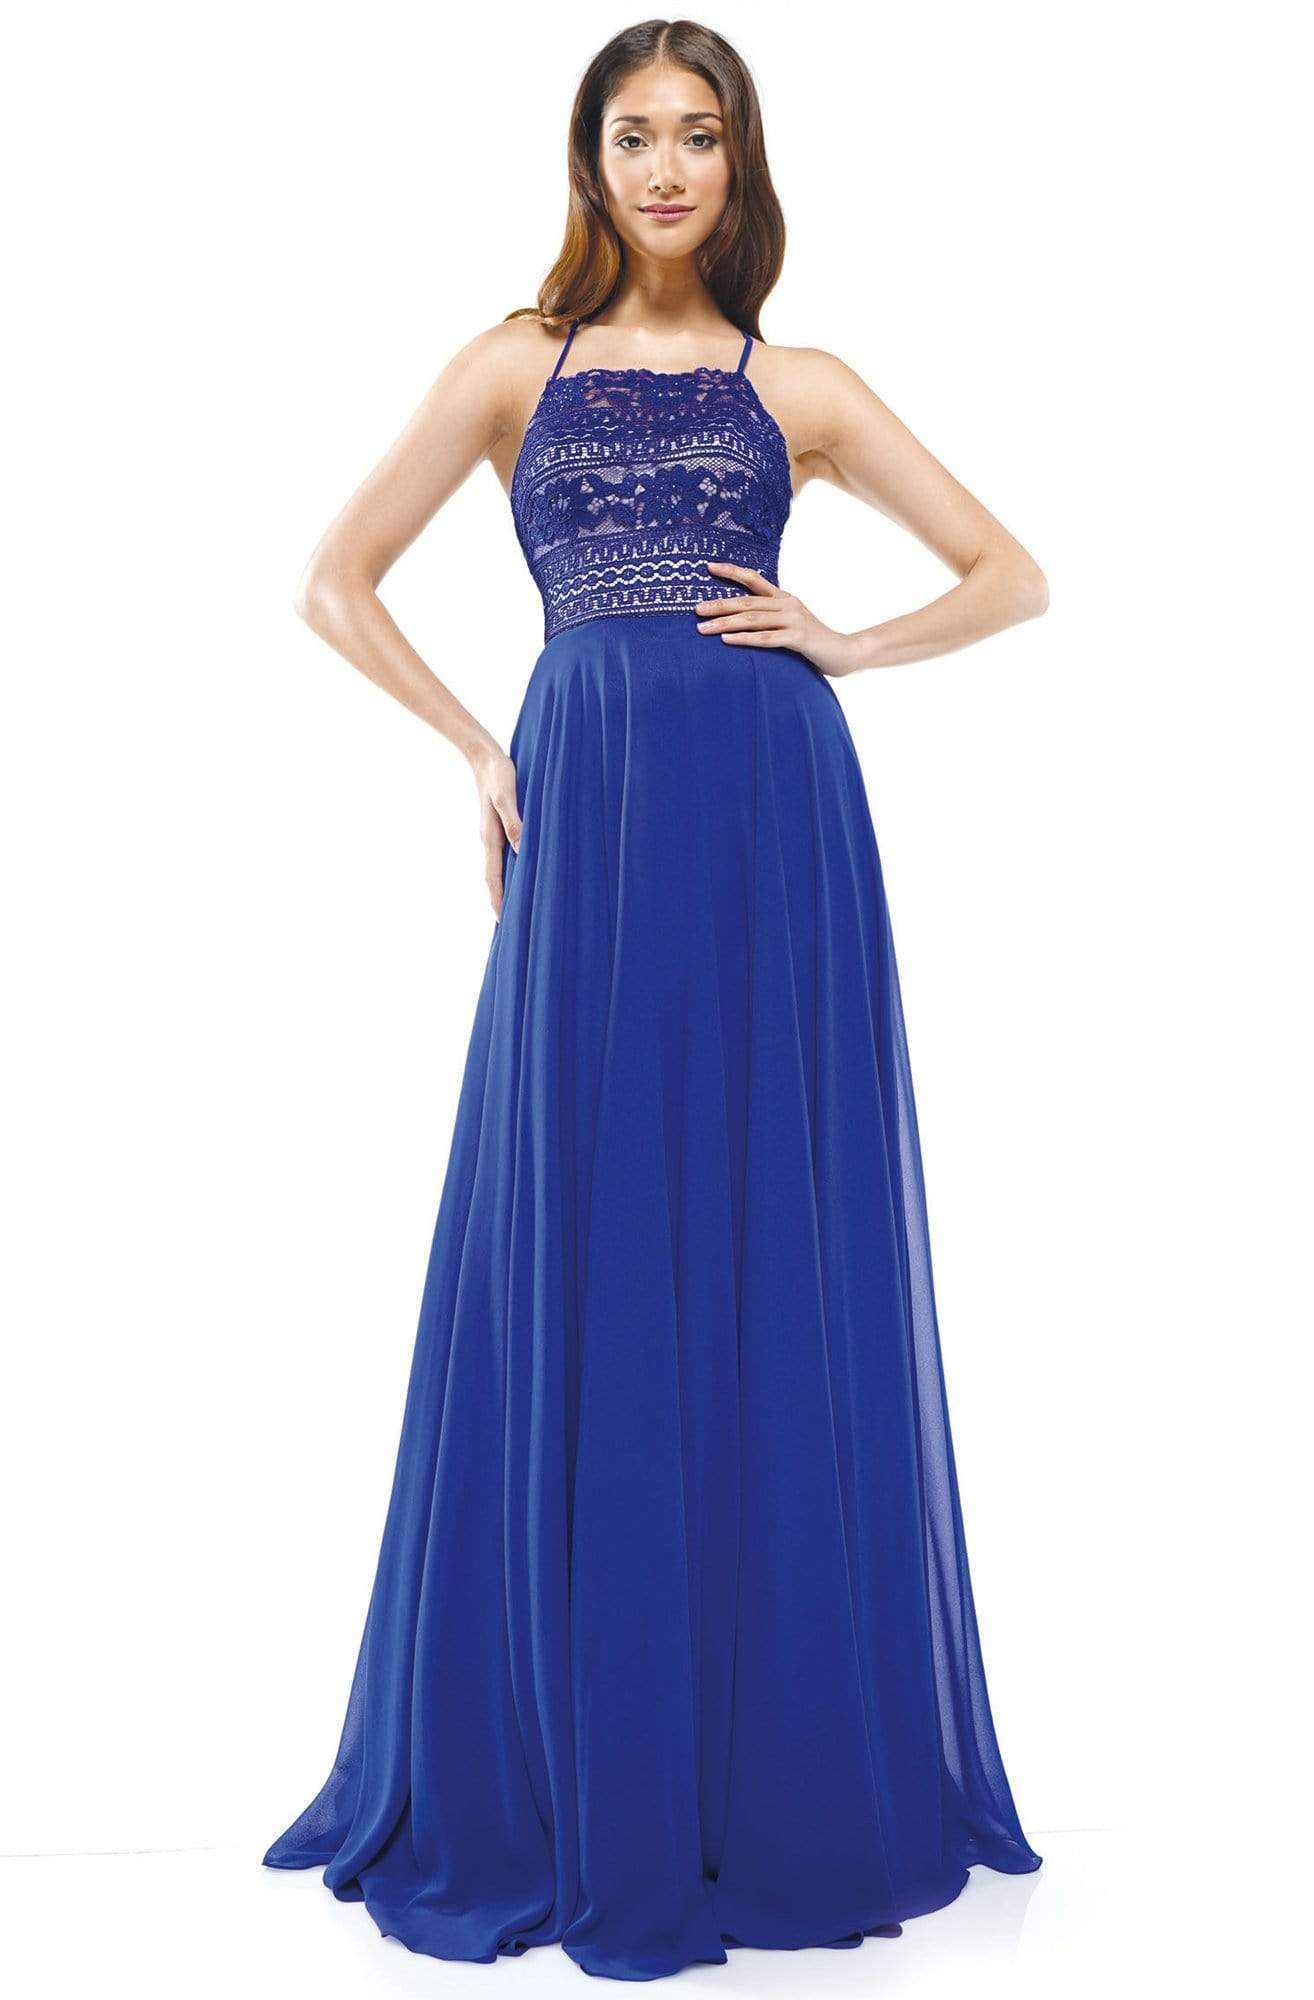 Glow Dress - G889 Strappy Sleeveless Lace Top Chiffon A-Line Gown Prom Dresses 0 / Royal